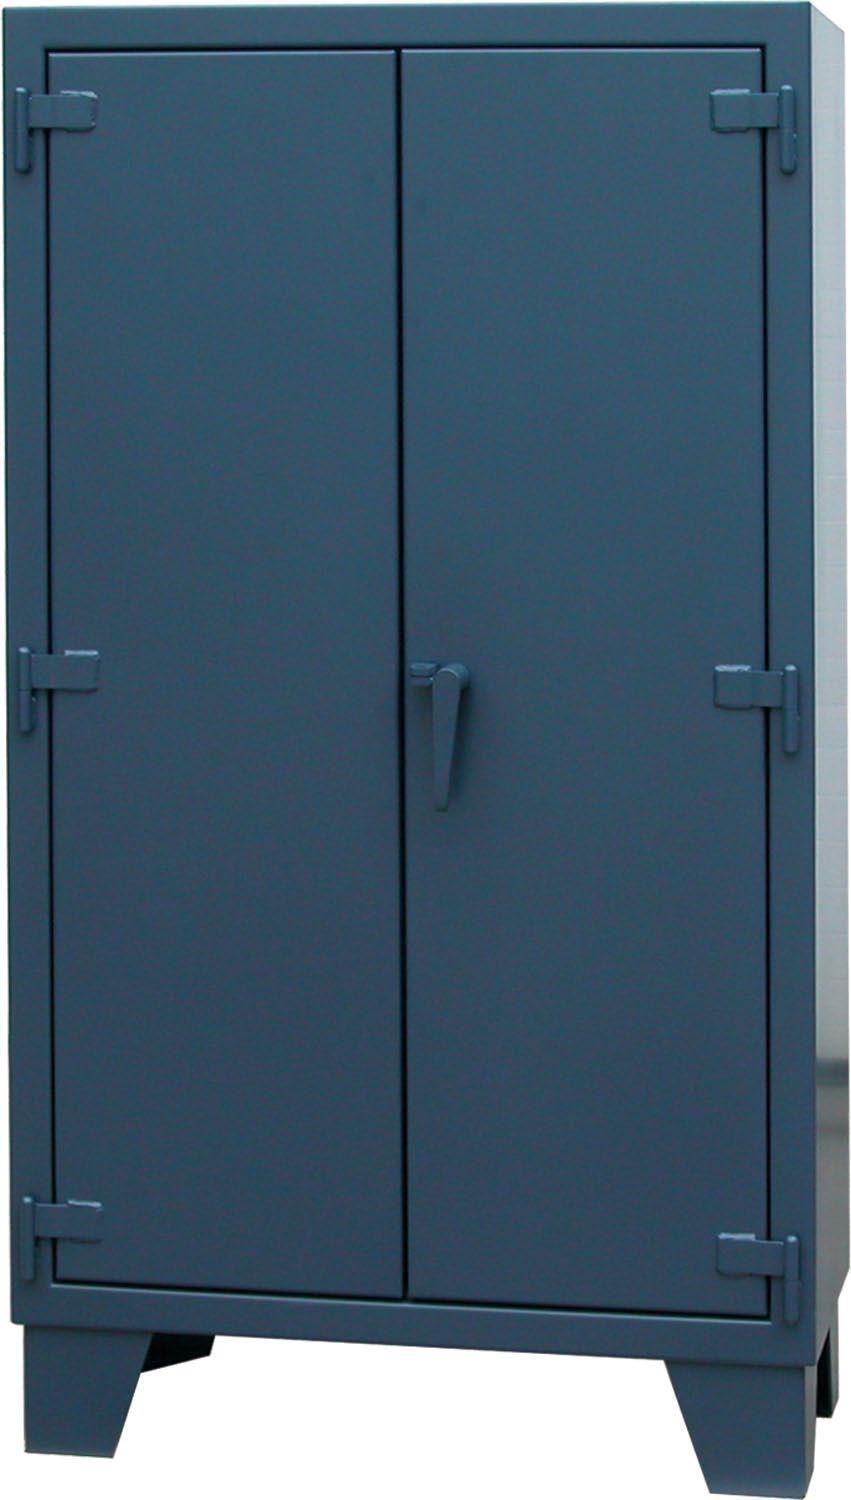 Storage Cabinets EX-Series Storage Cabinets Our Extreme Duty storage cabinets set the standard for heavy duty storage.